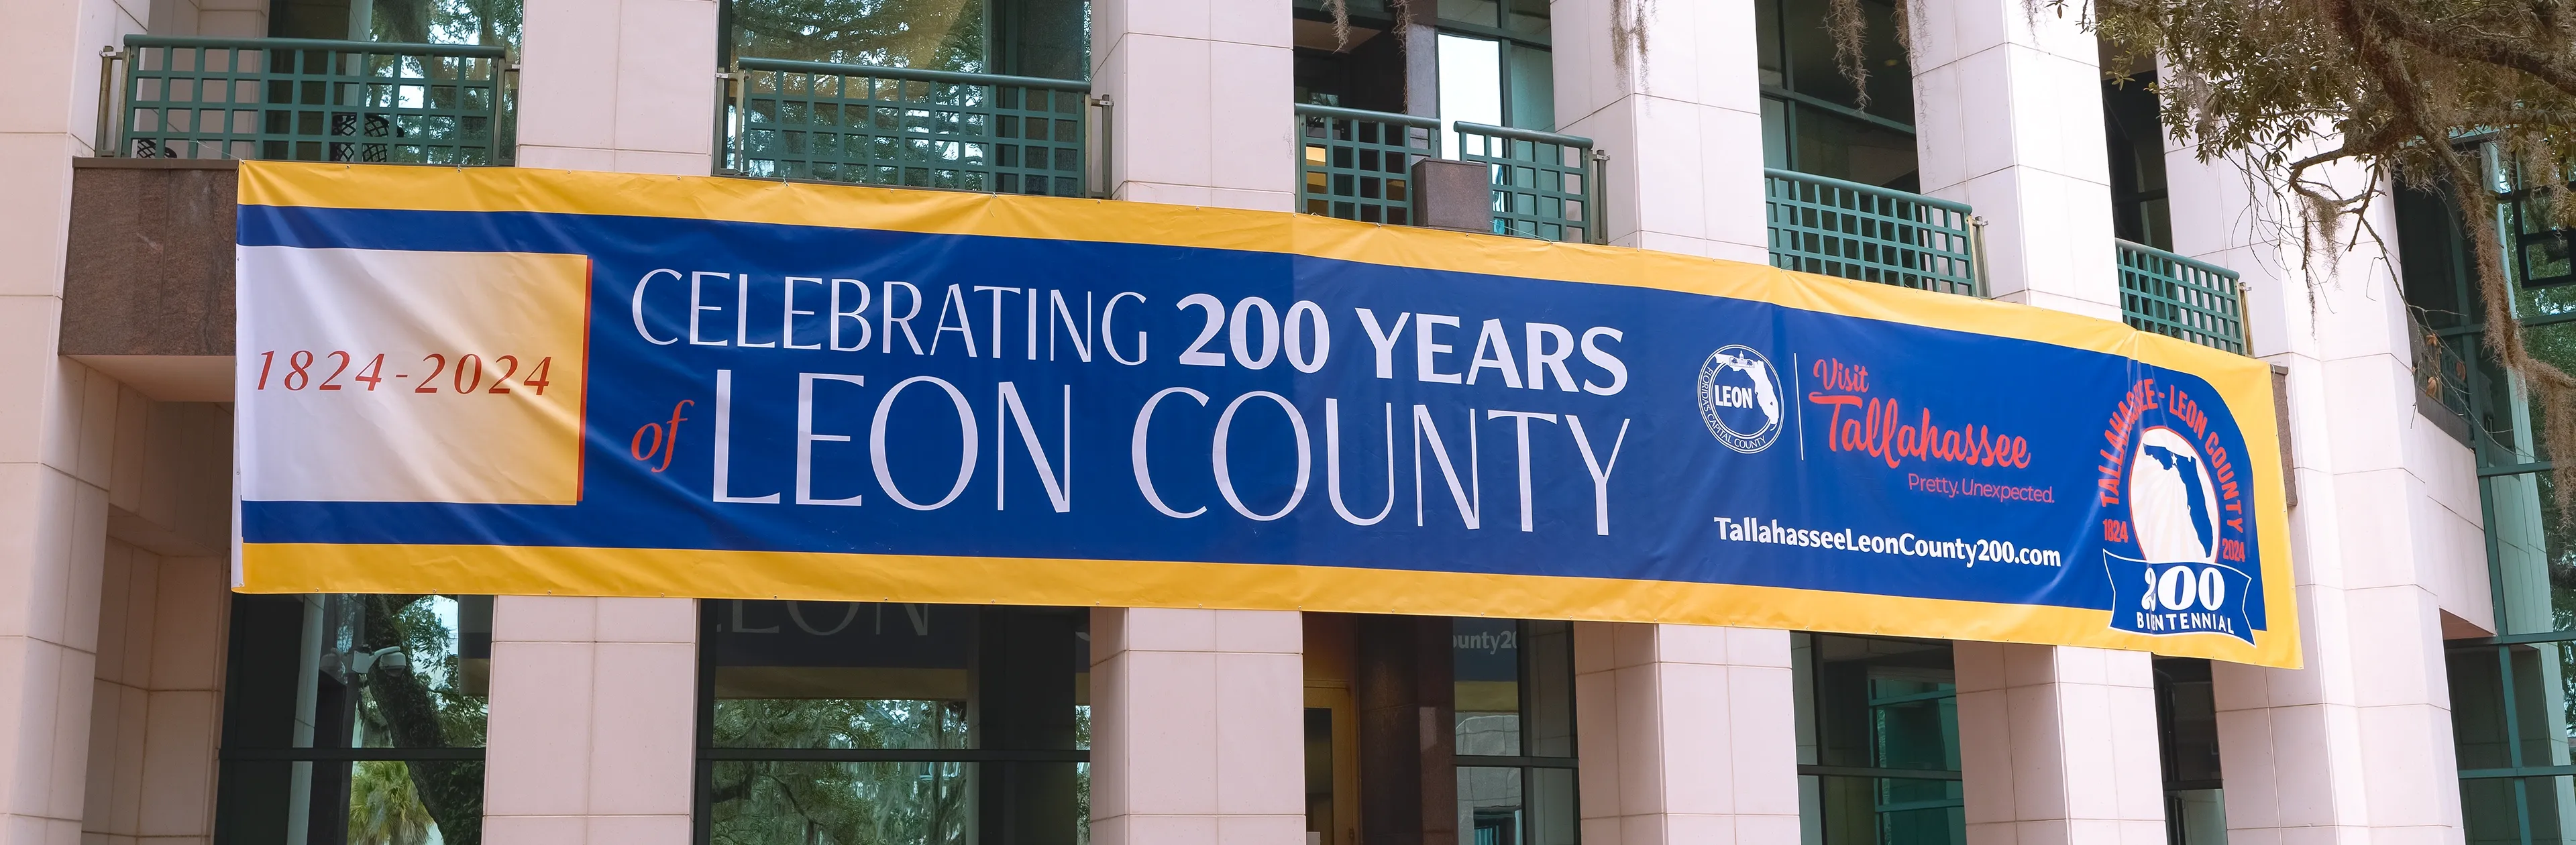 Bicentennial celebration banner outside the Leon County Courthouse